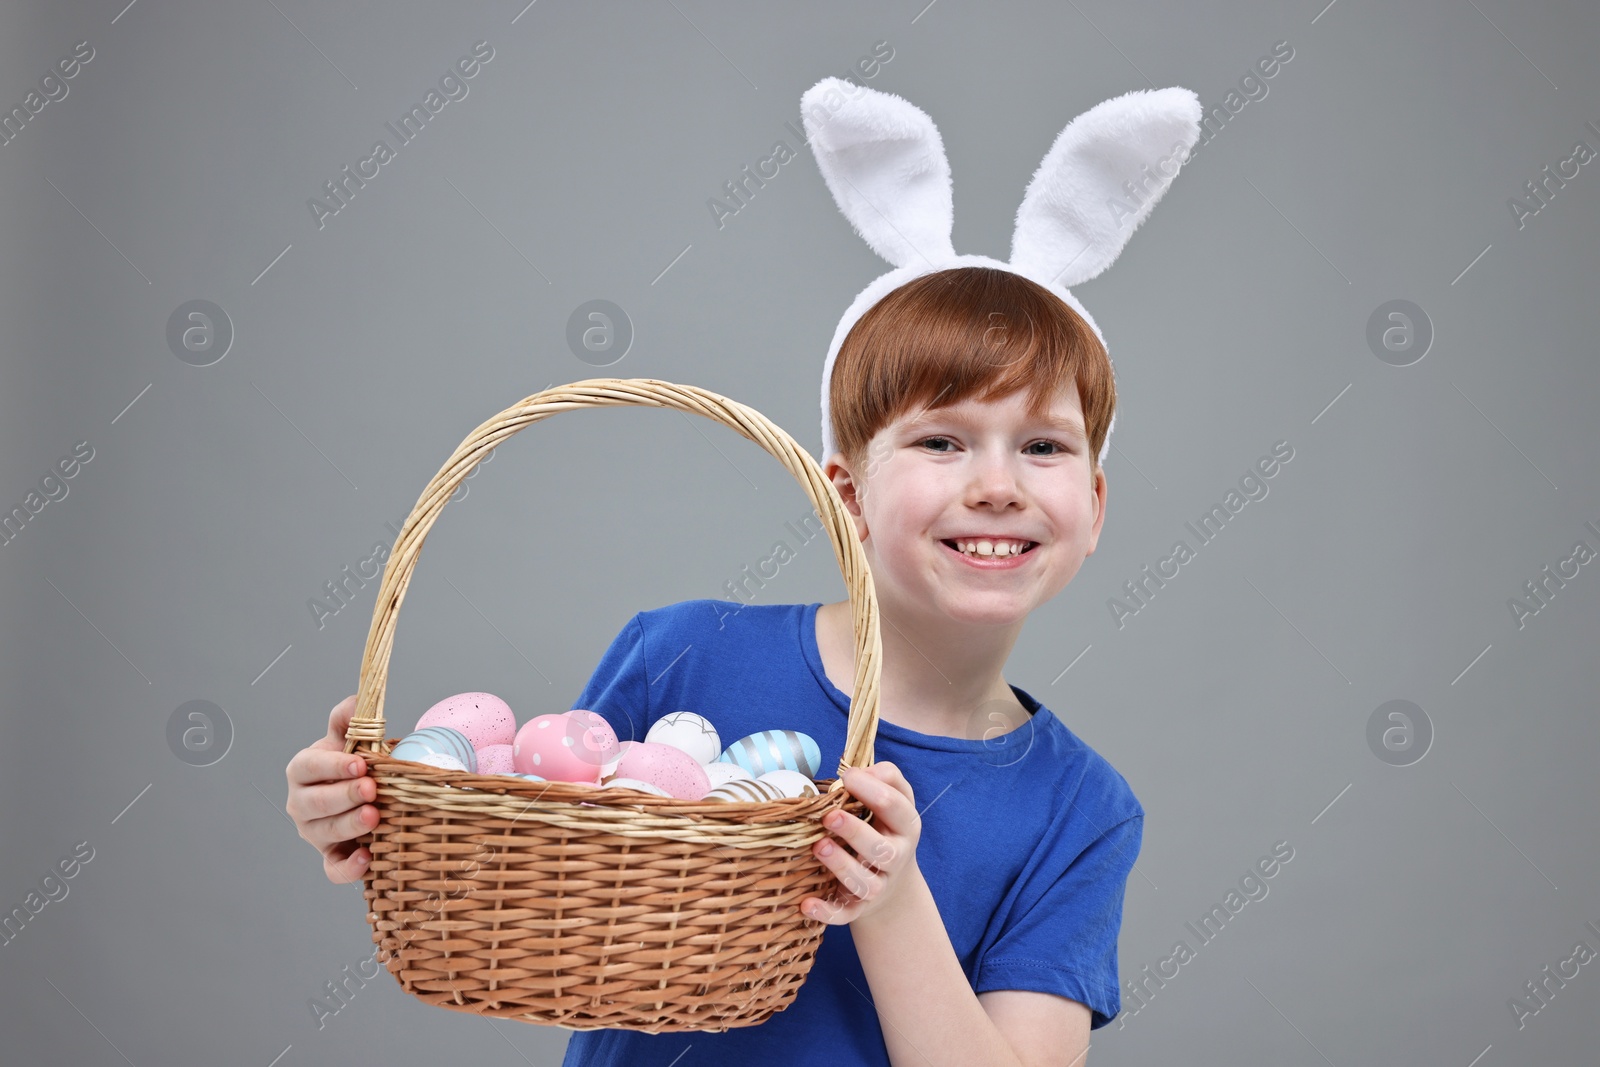 Photo of Easter celebration. Cute little boy with bunny ears and wicker basket full of painted eggs on grey background